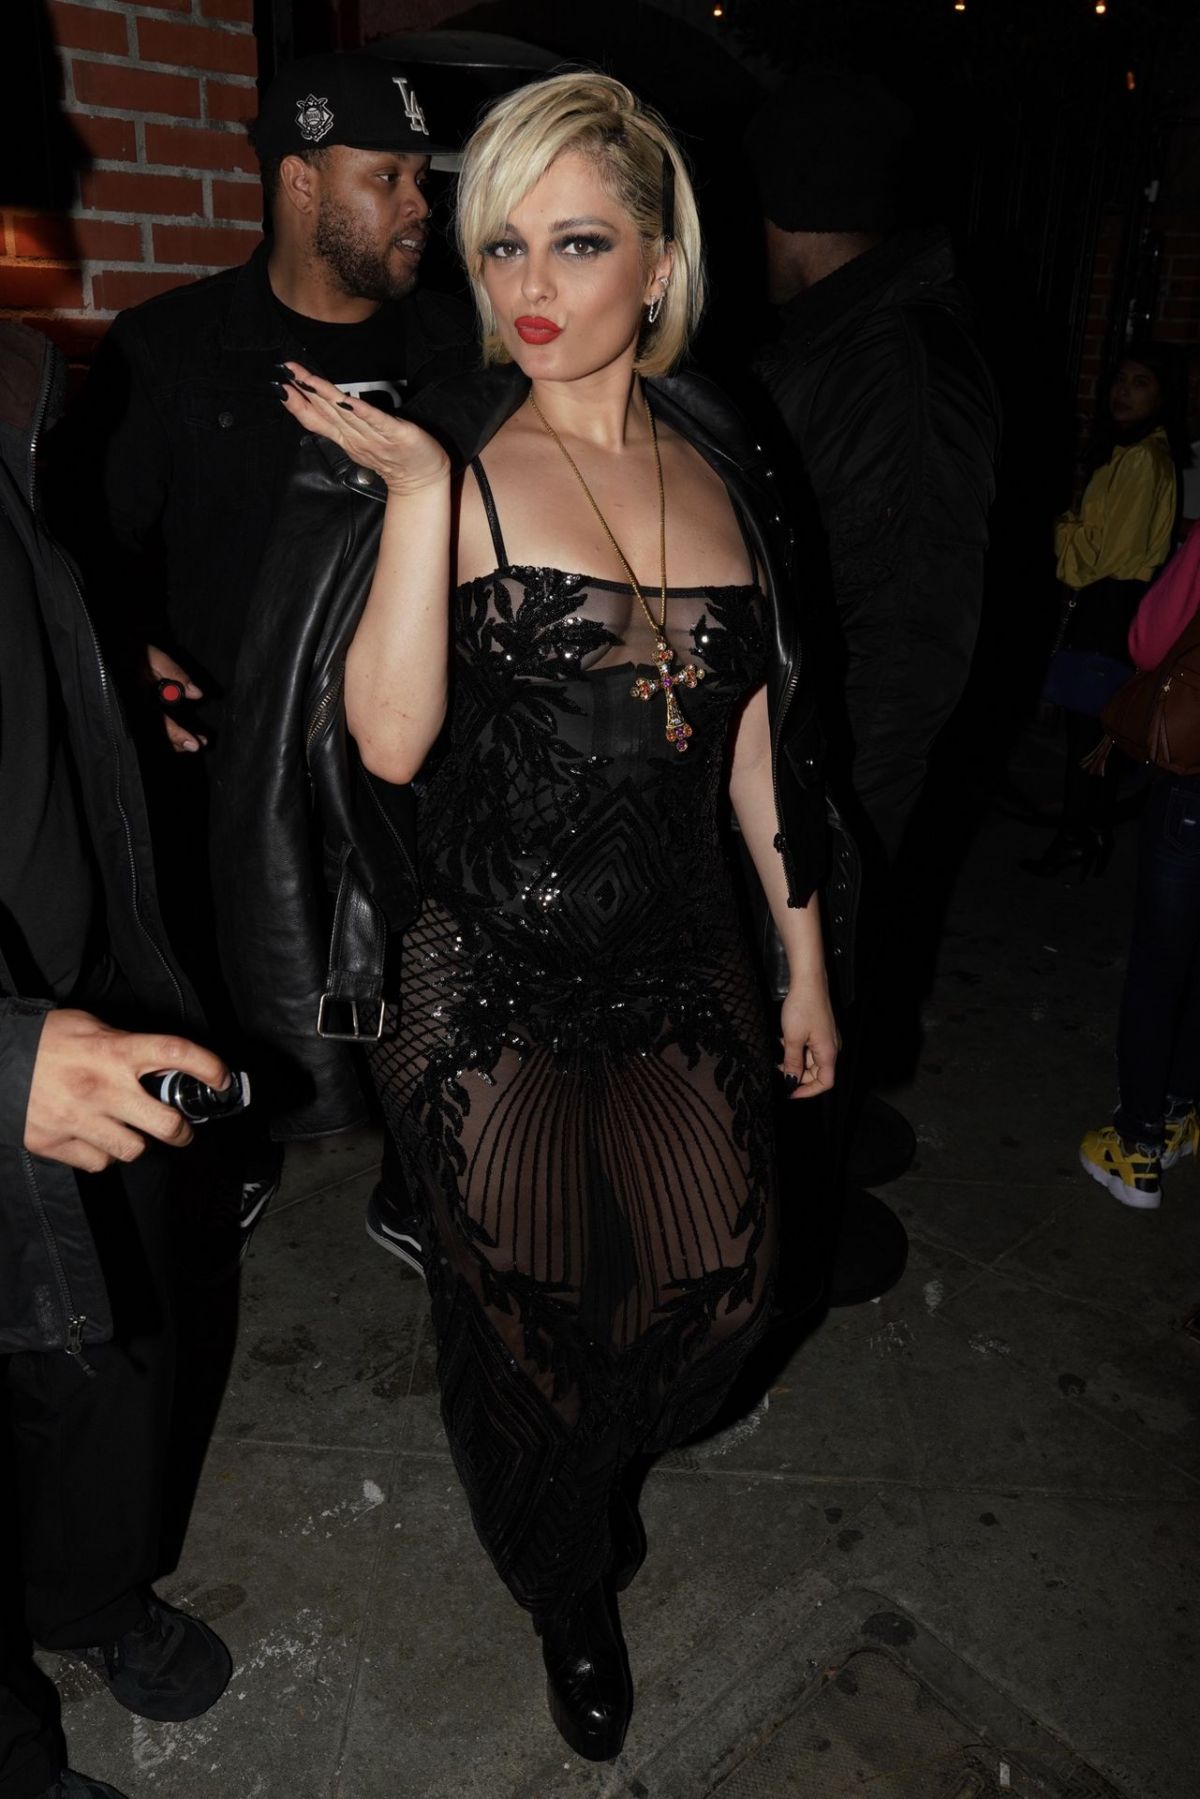 bebe-rexha-night-out-in-west-hollywood-03-23-2019-0.jpg